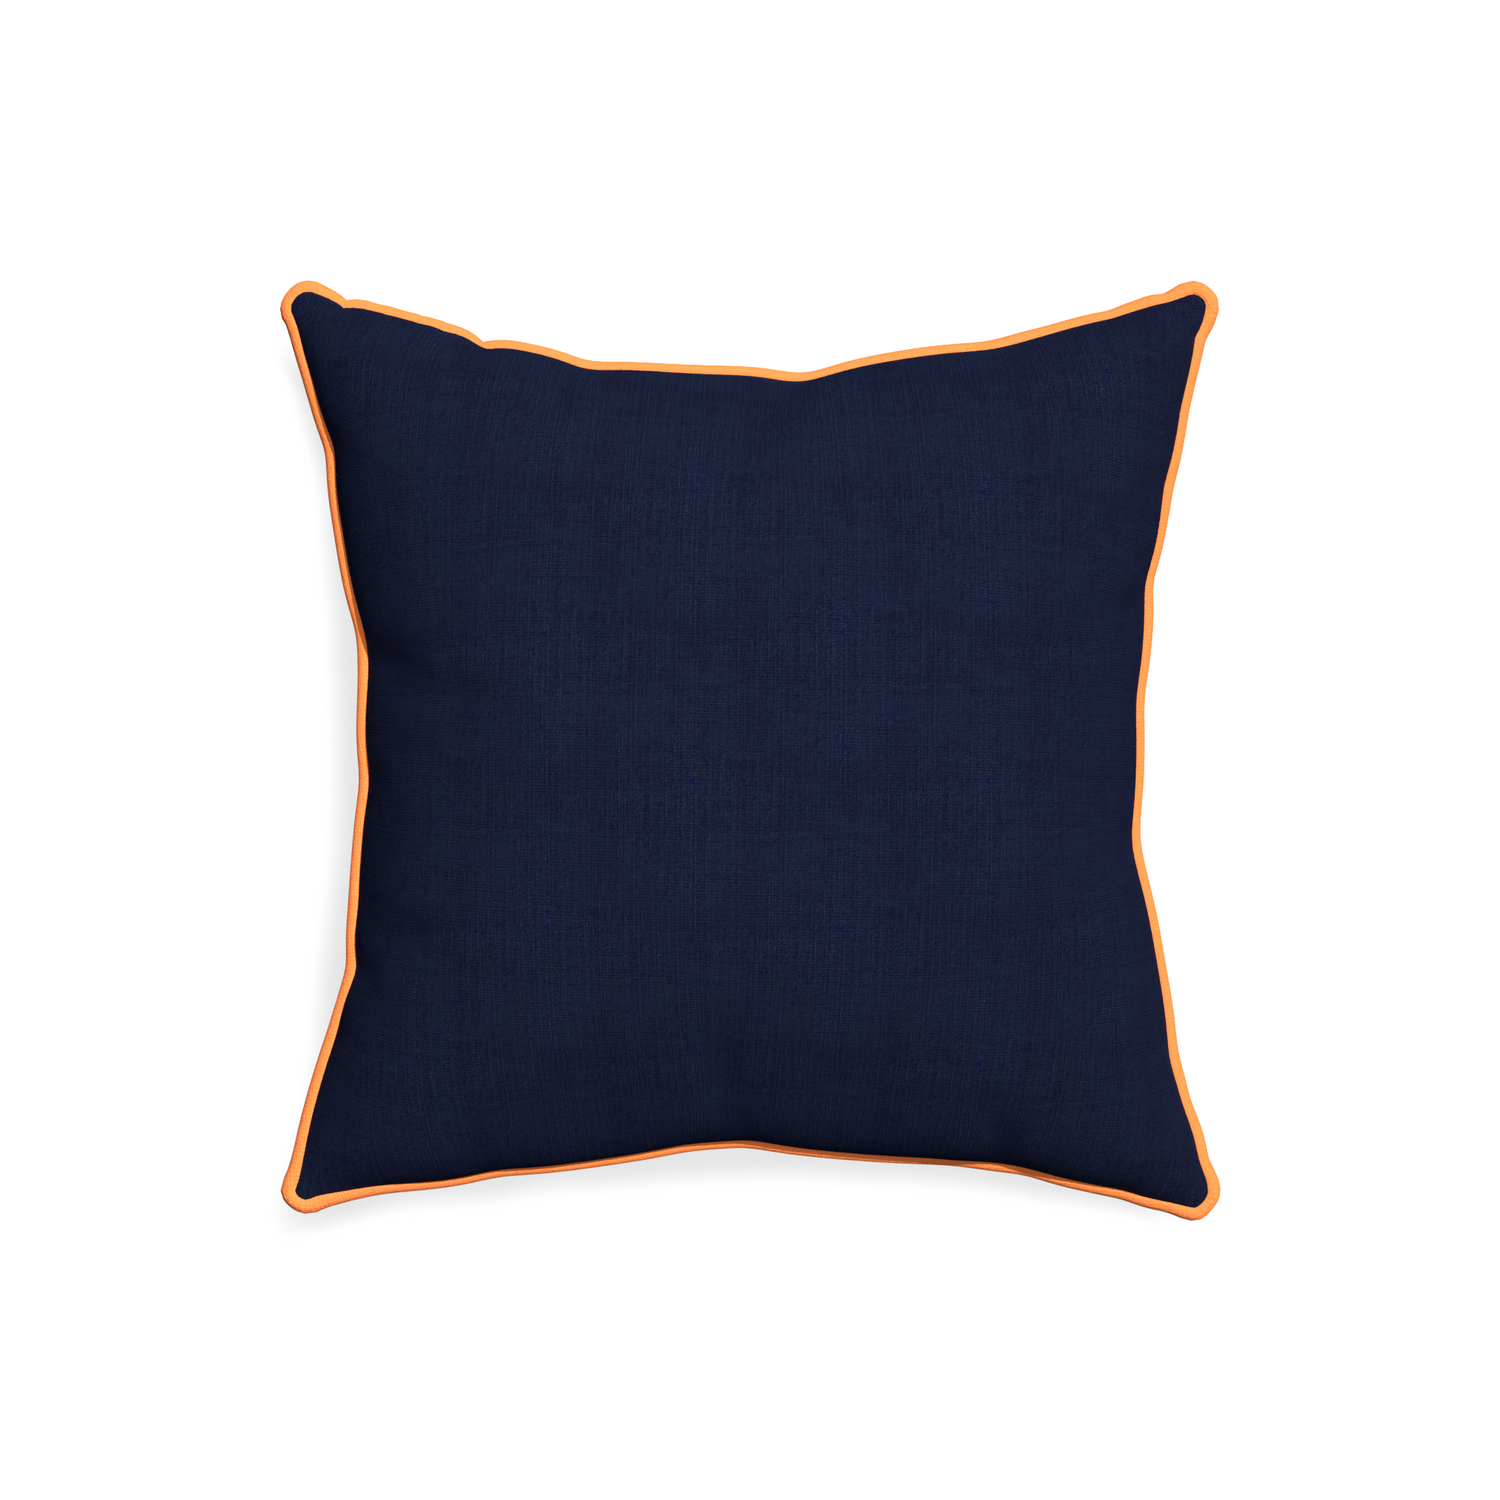 20-square midnight custom navy bluepillow with clementine piping on white background